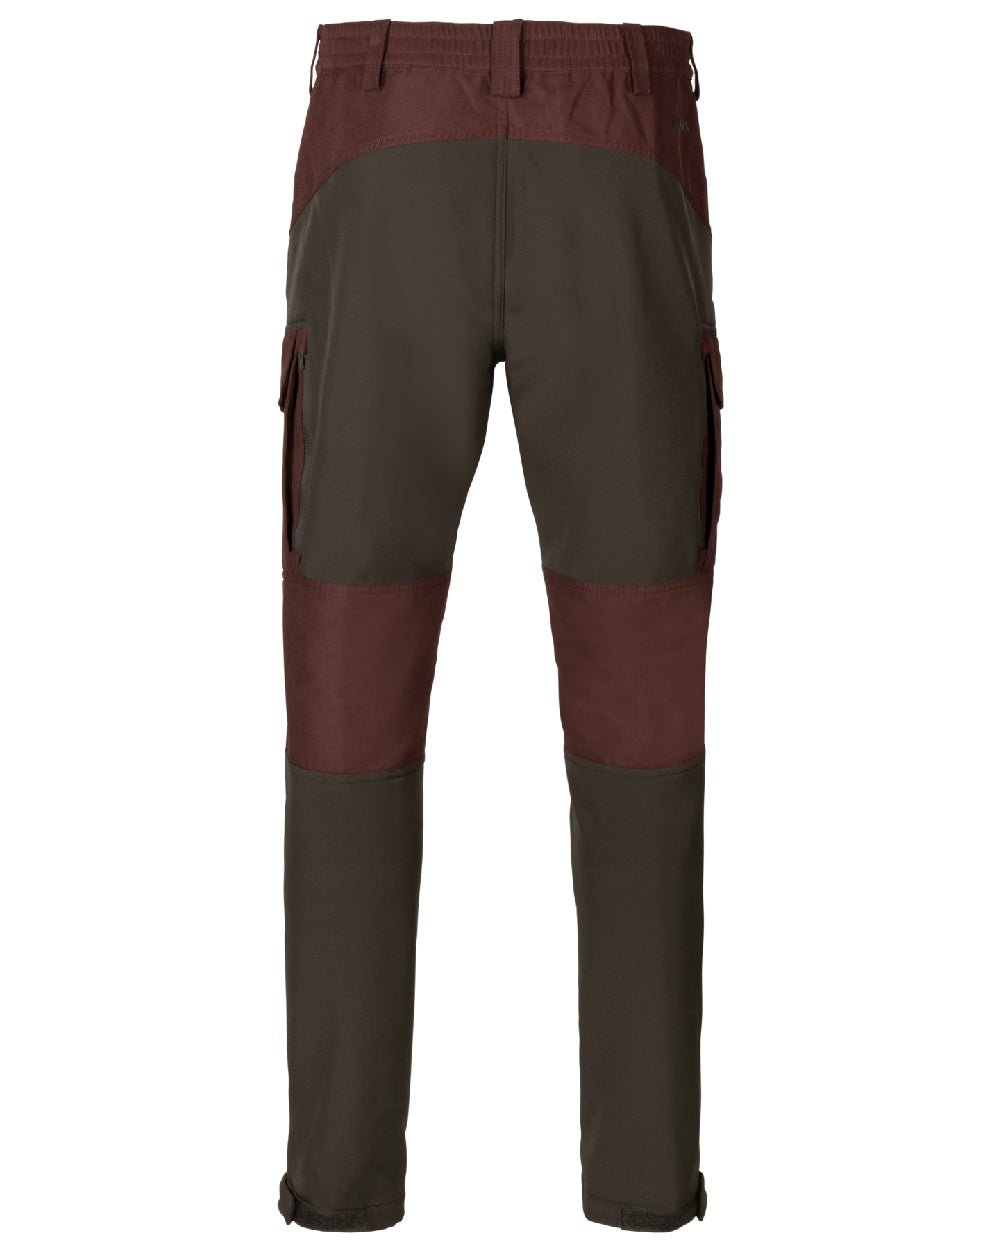 Bloodstone Red/Shadow Brown coloured Harkila Scandinavian Trousers on white background 